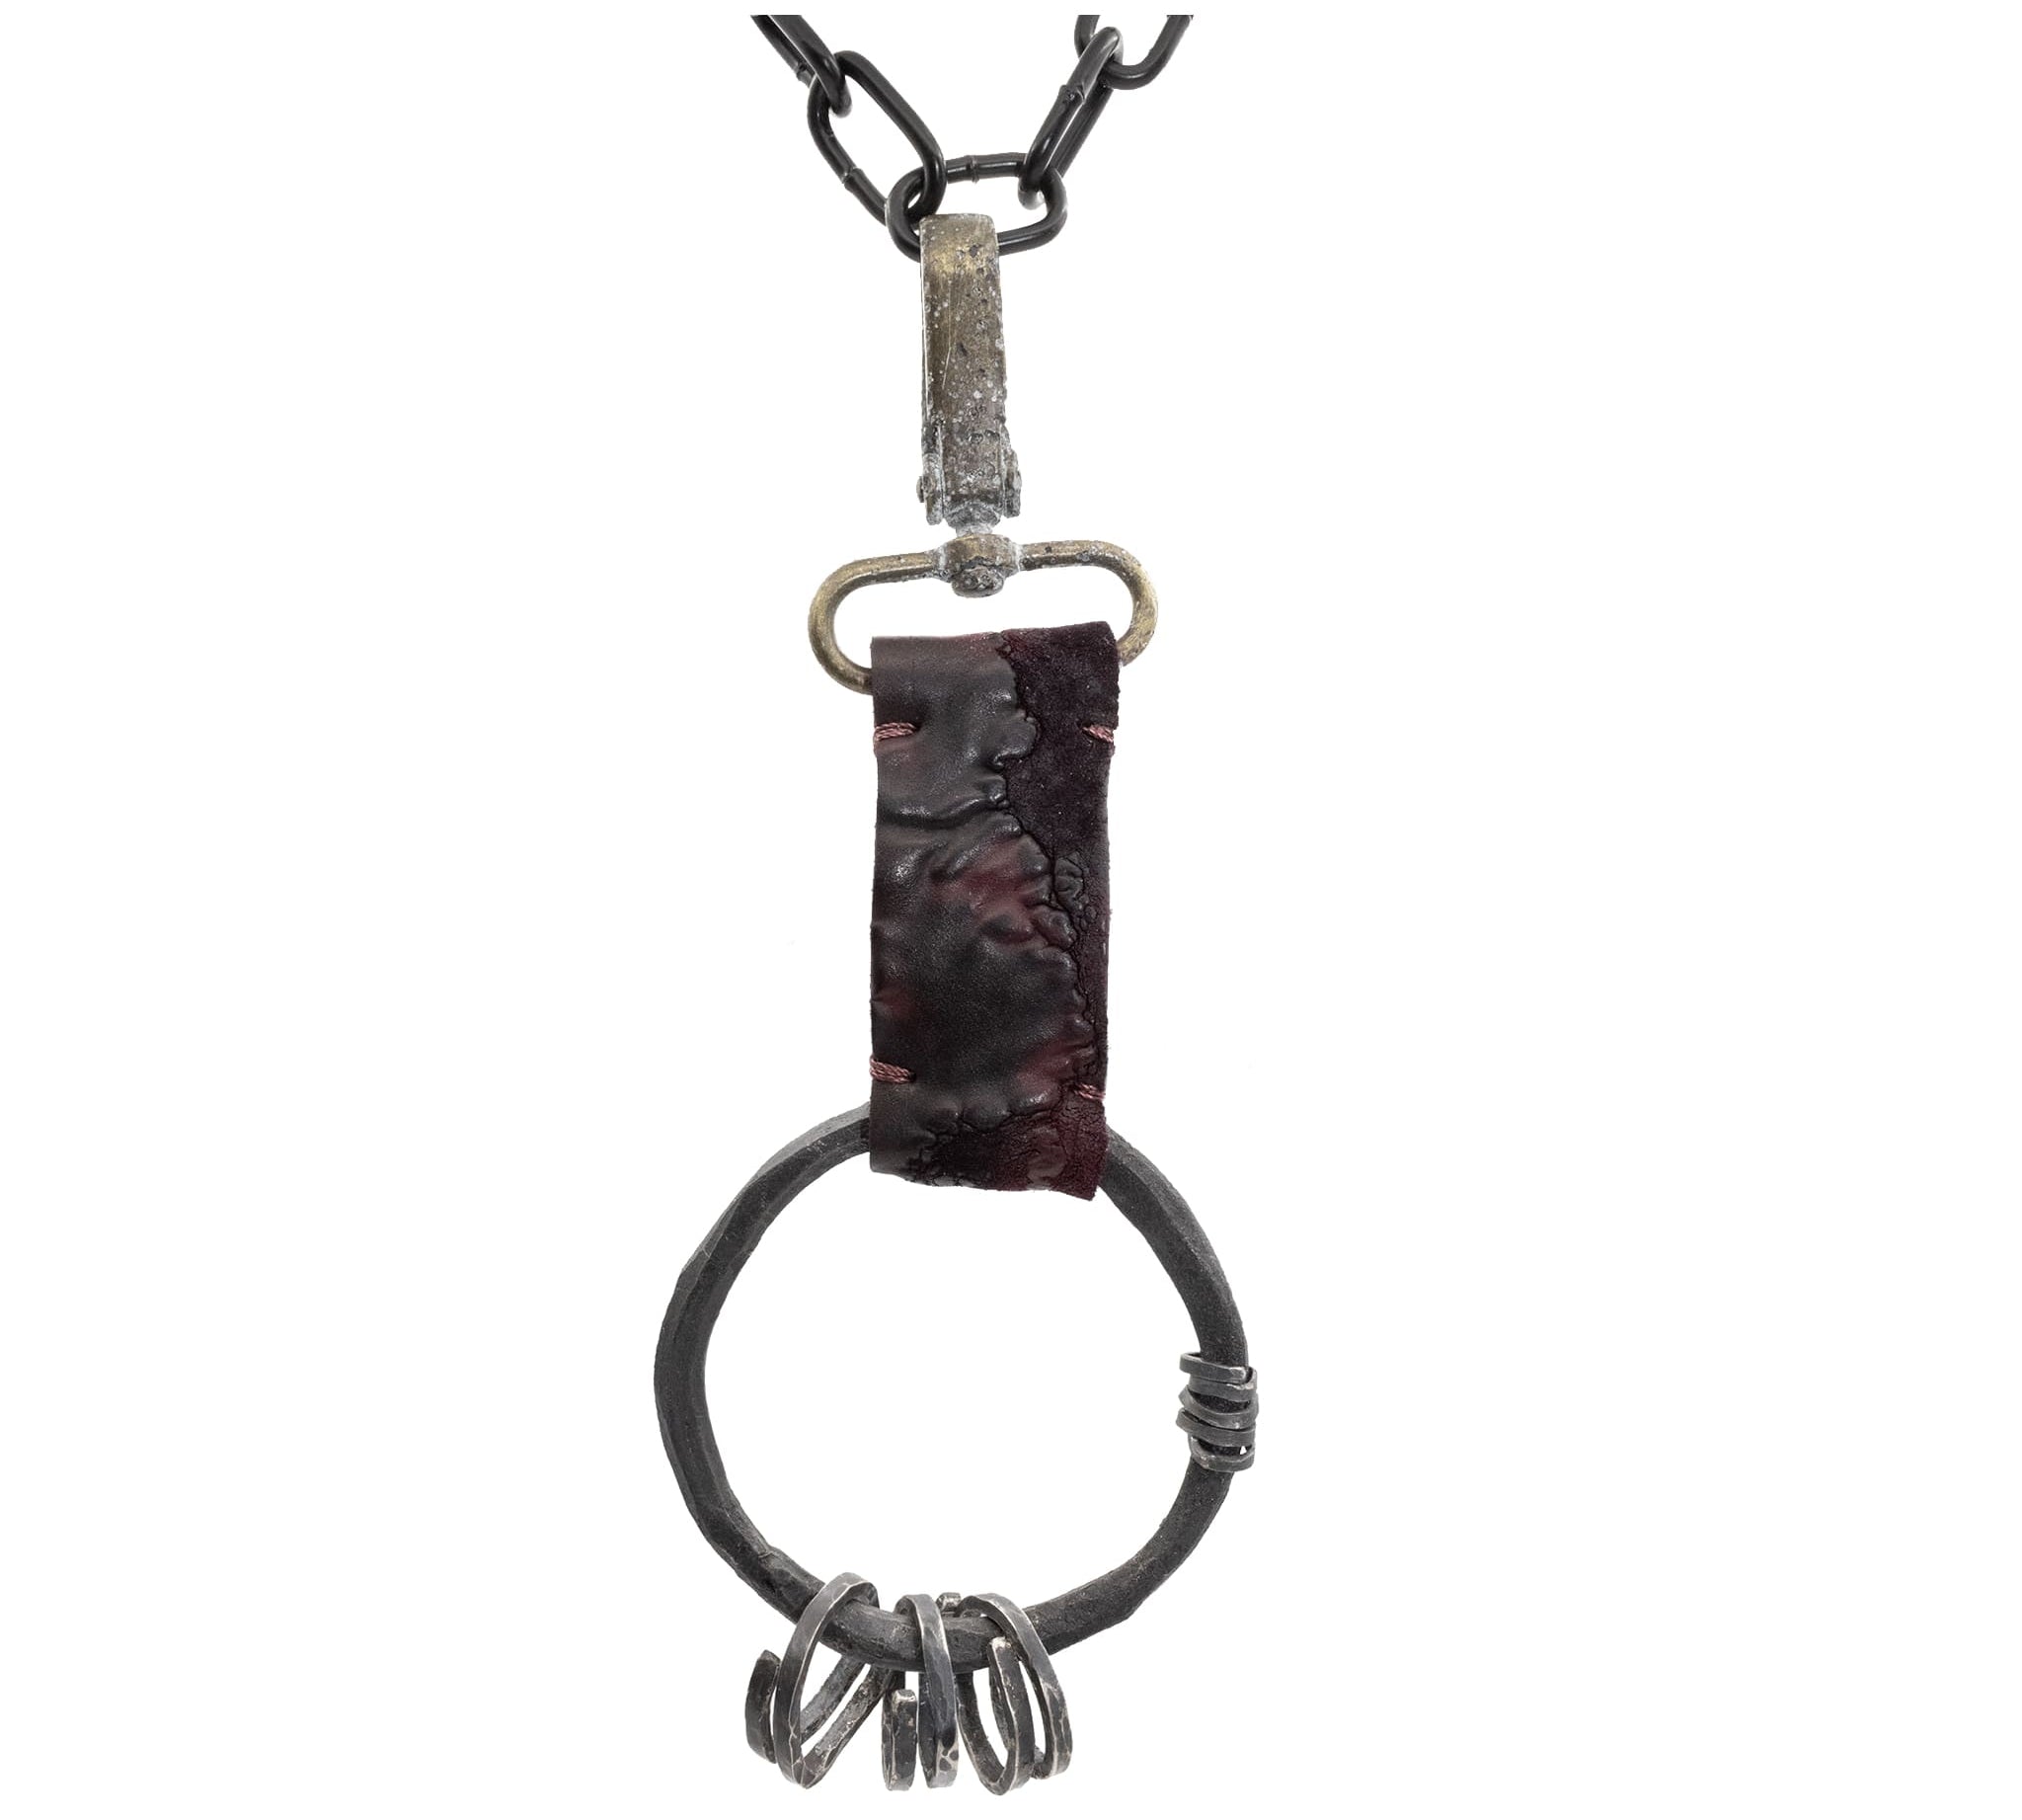 the hand sewn reverse culatta leather prison keys feature a blood red dye treatment and a distressed and corroded swivel clip. a large hand forged black iron ring holds the triple oxidised .925 silver key rings.